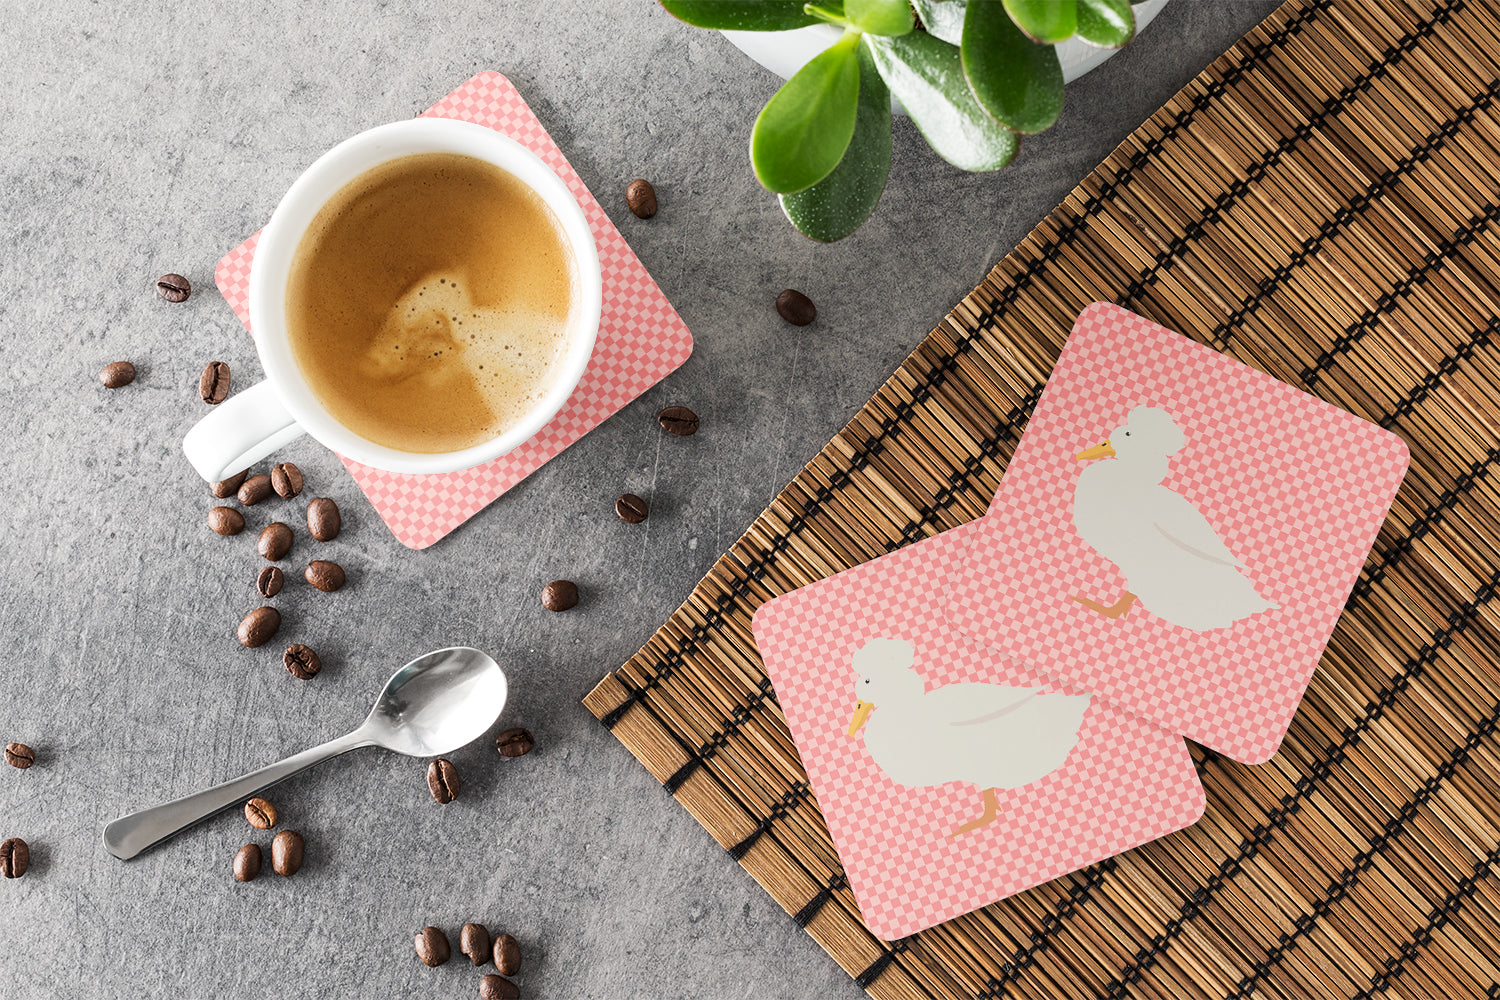 Crested Duck Pink Check Foam Coaster Set of 4 BB7857FC - the-store.com